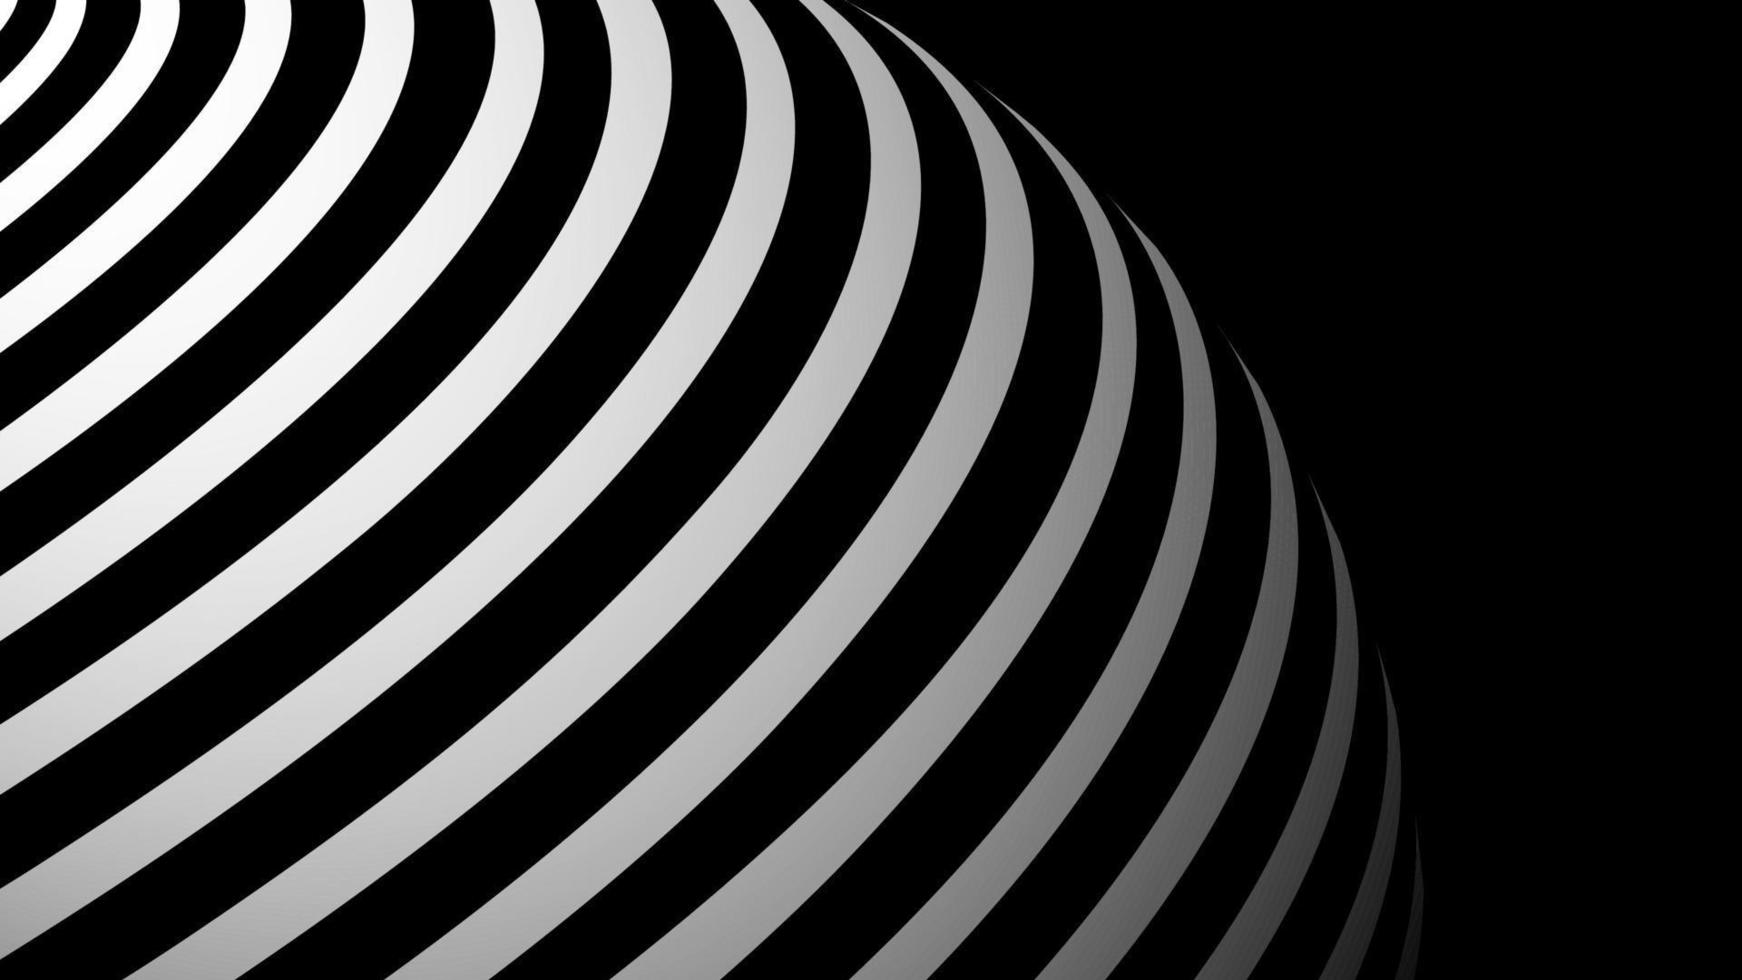 Curved globe rounded lines on black background. White bold line. Design for technology, network, illustration, construction, and digital data visualization. vector